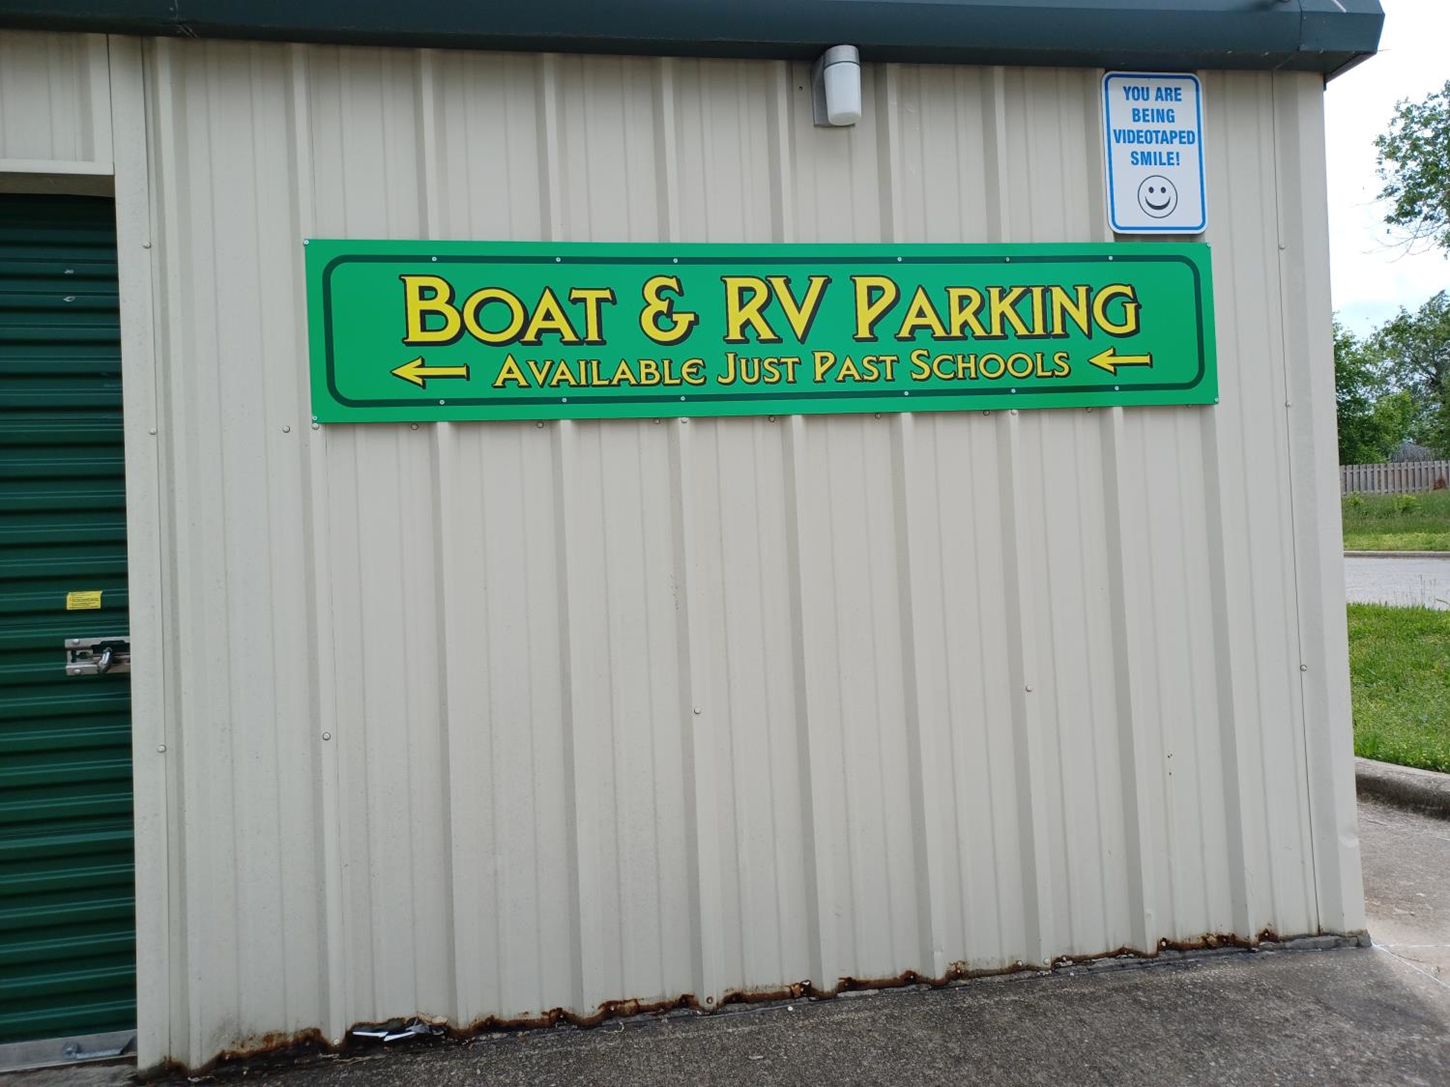 You can rent Boat, RV and Outdoor parking spaces at our nearby facility past the Hollister High School